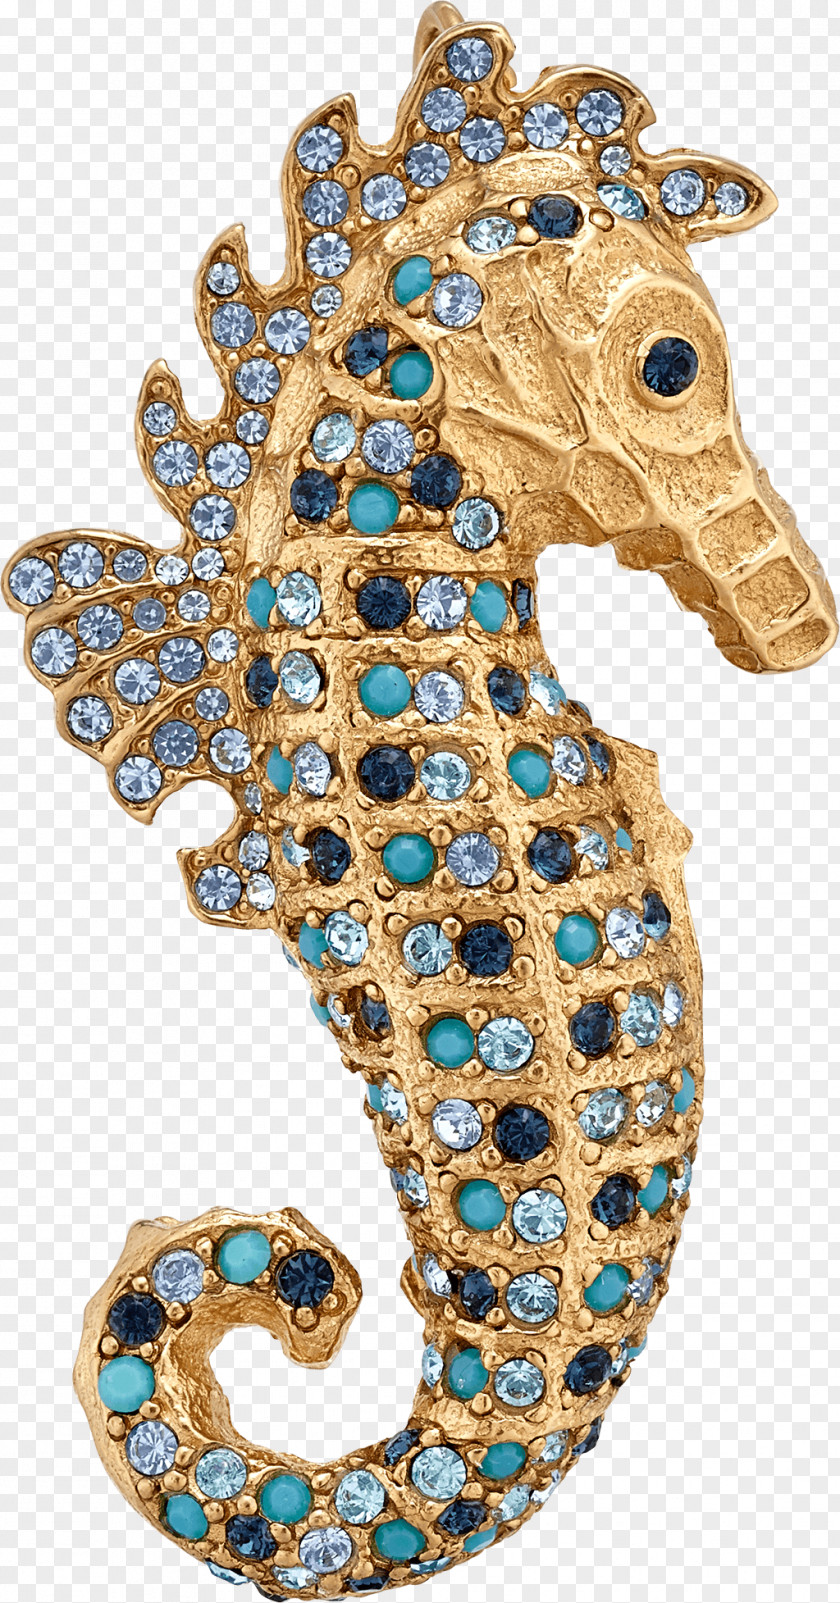 Seahorse Jewellery Brooch Syngnathiformes Clothing Accessories PNG